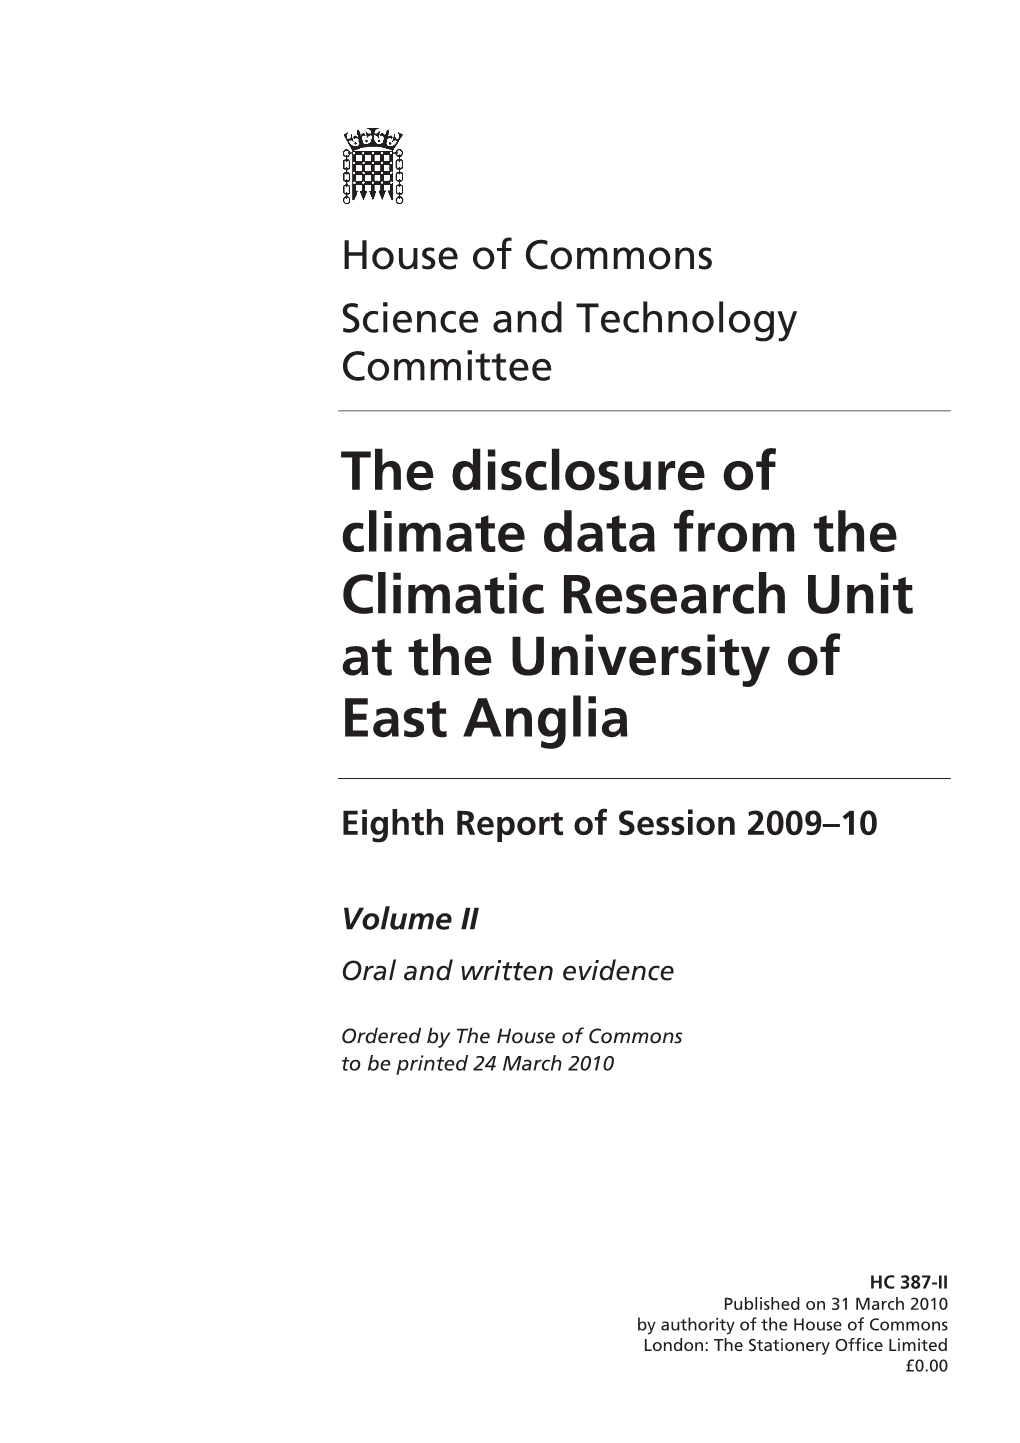 The Disclosure of Climate Data from the Climatic Research Unit at the University of East Anglia